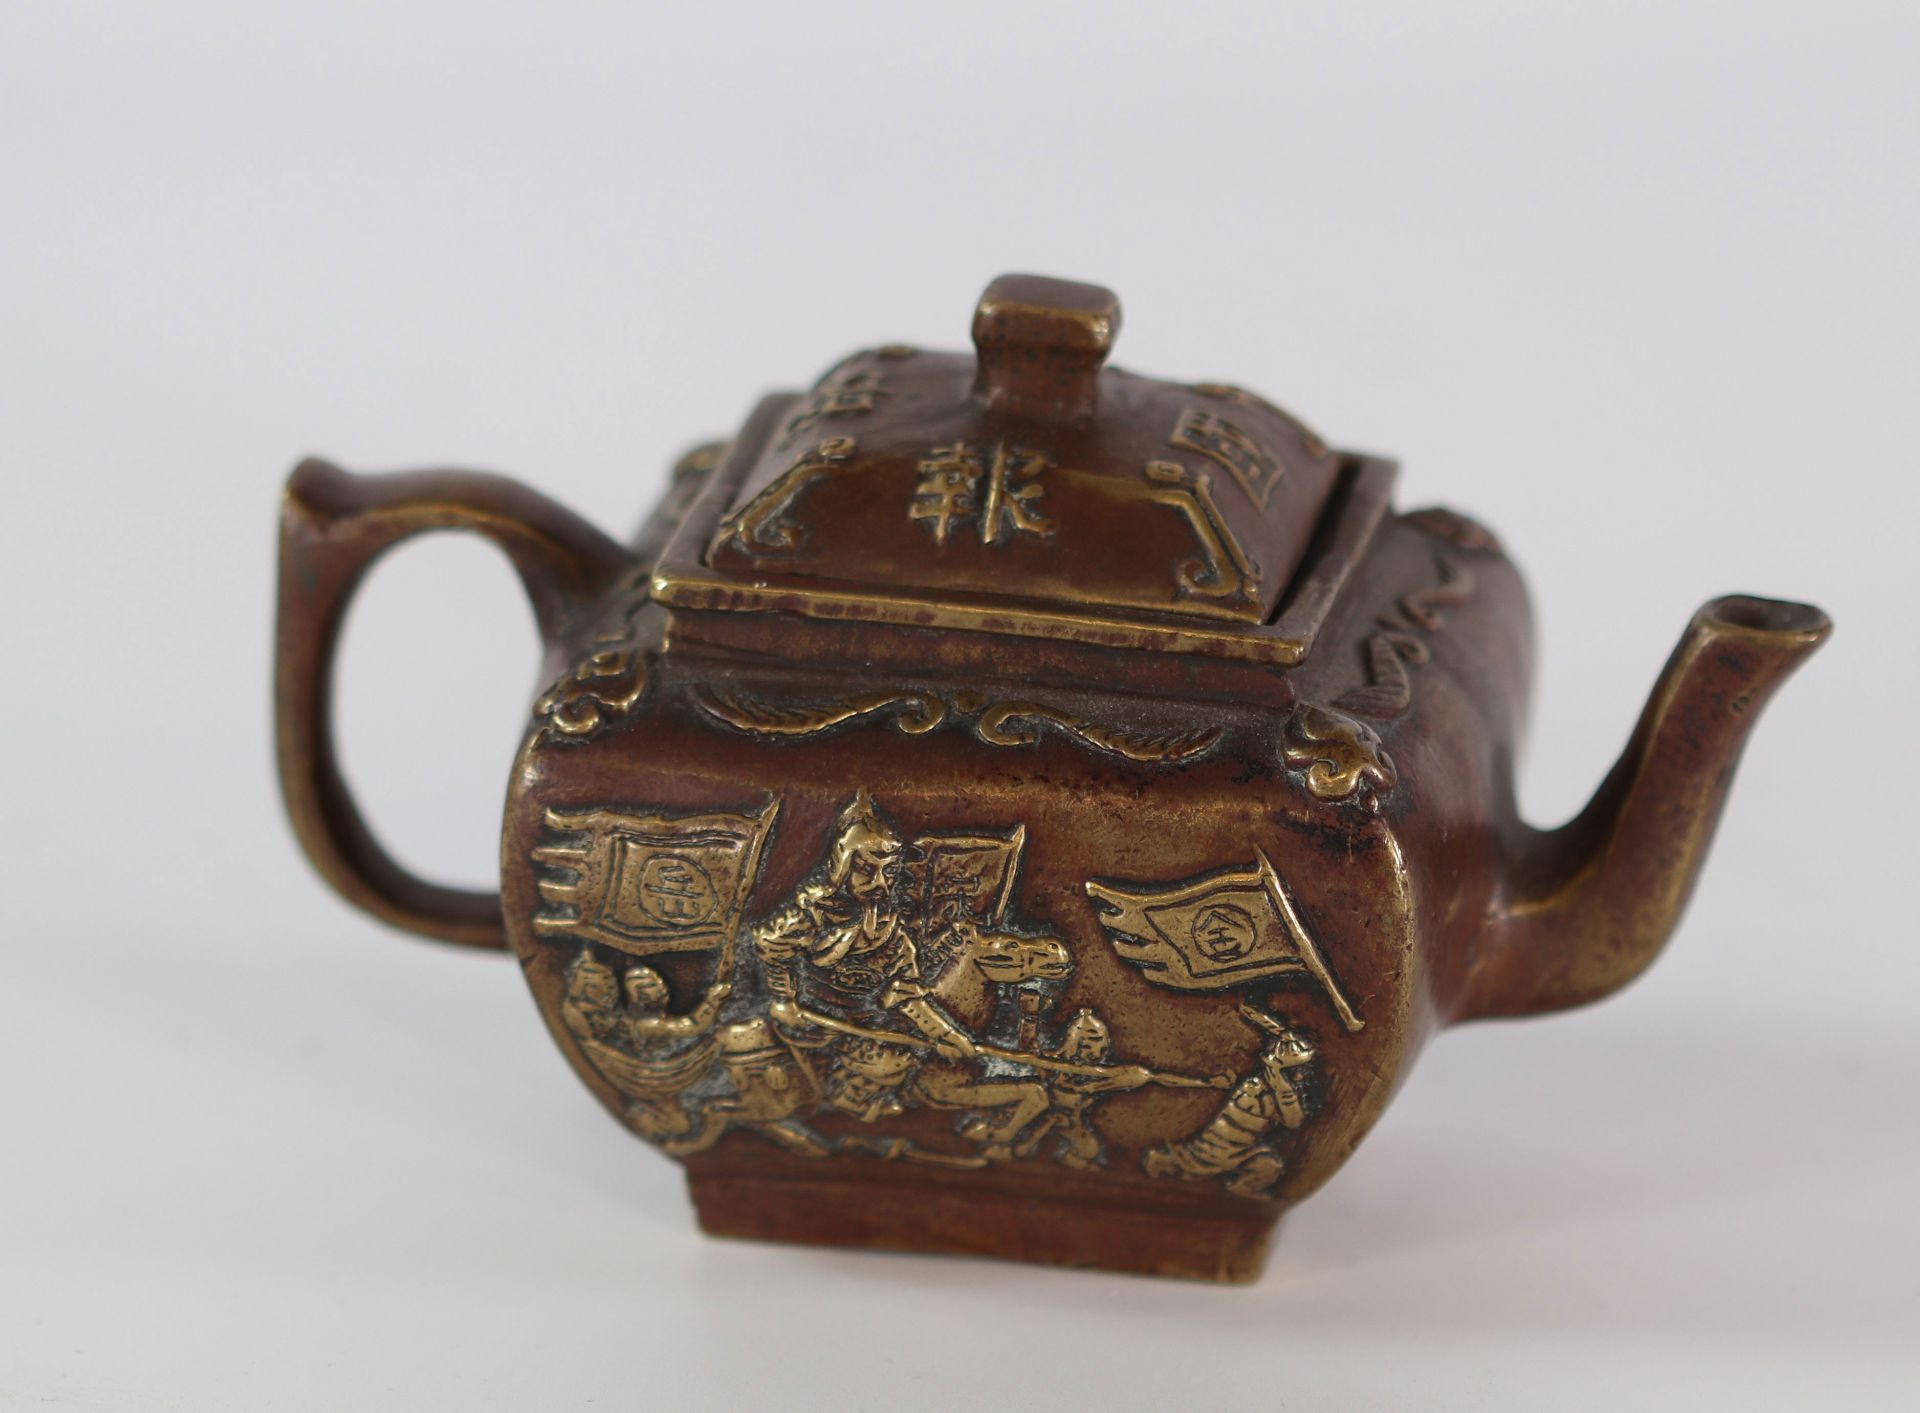 China bronze teapot decorated with characters - Image 2 of 3